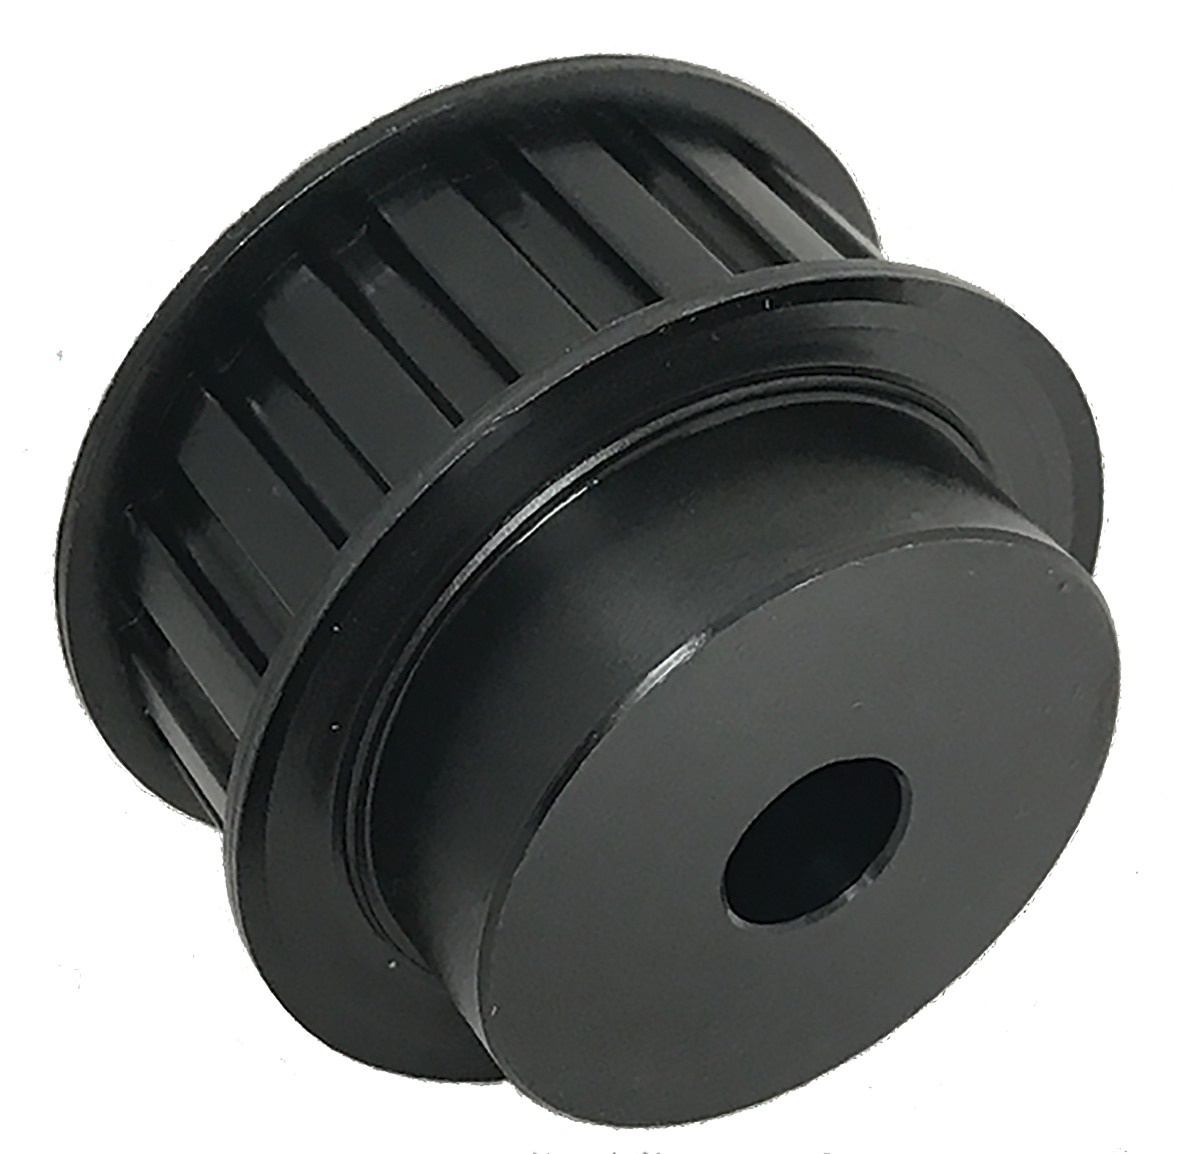 19H200-6FS8 - Steel Imperial Pitch Pulleys